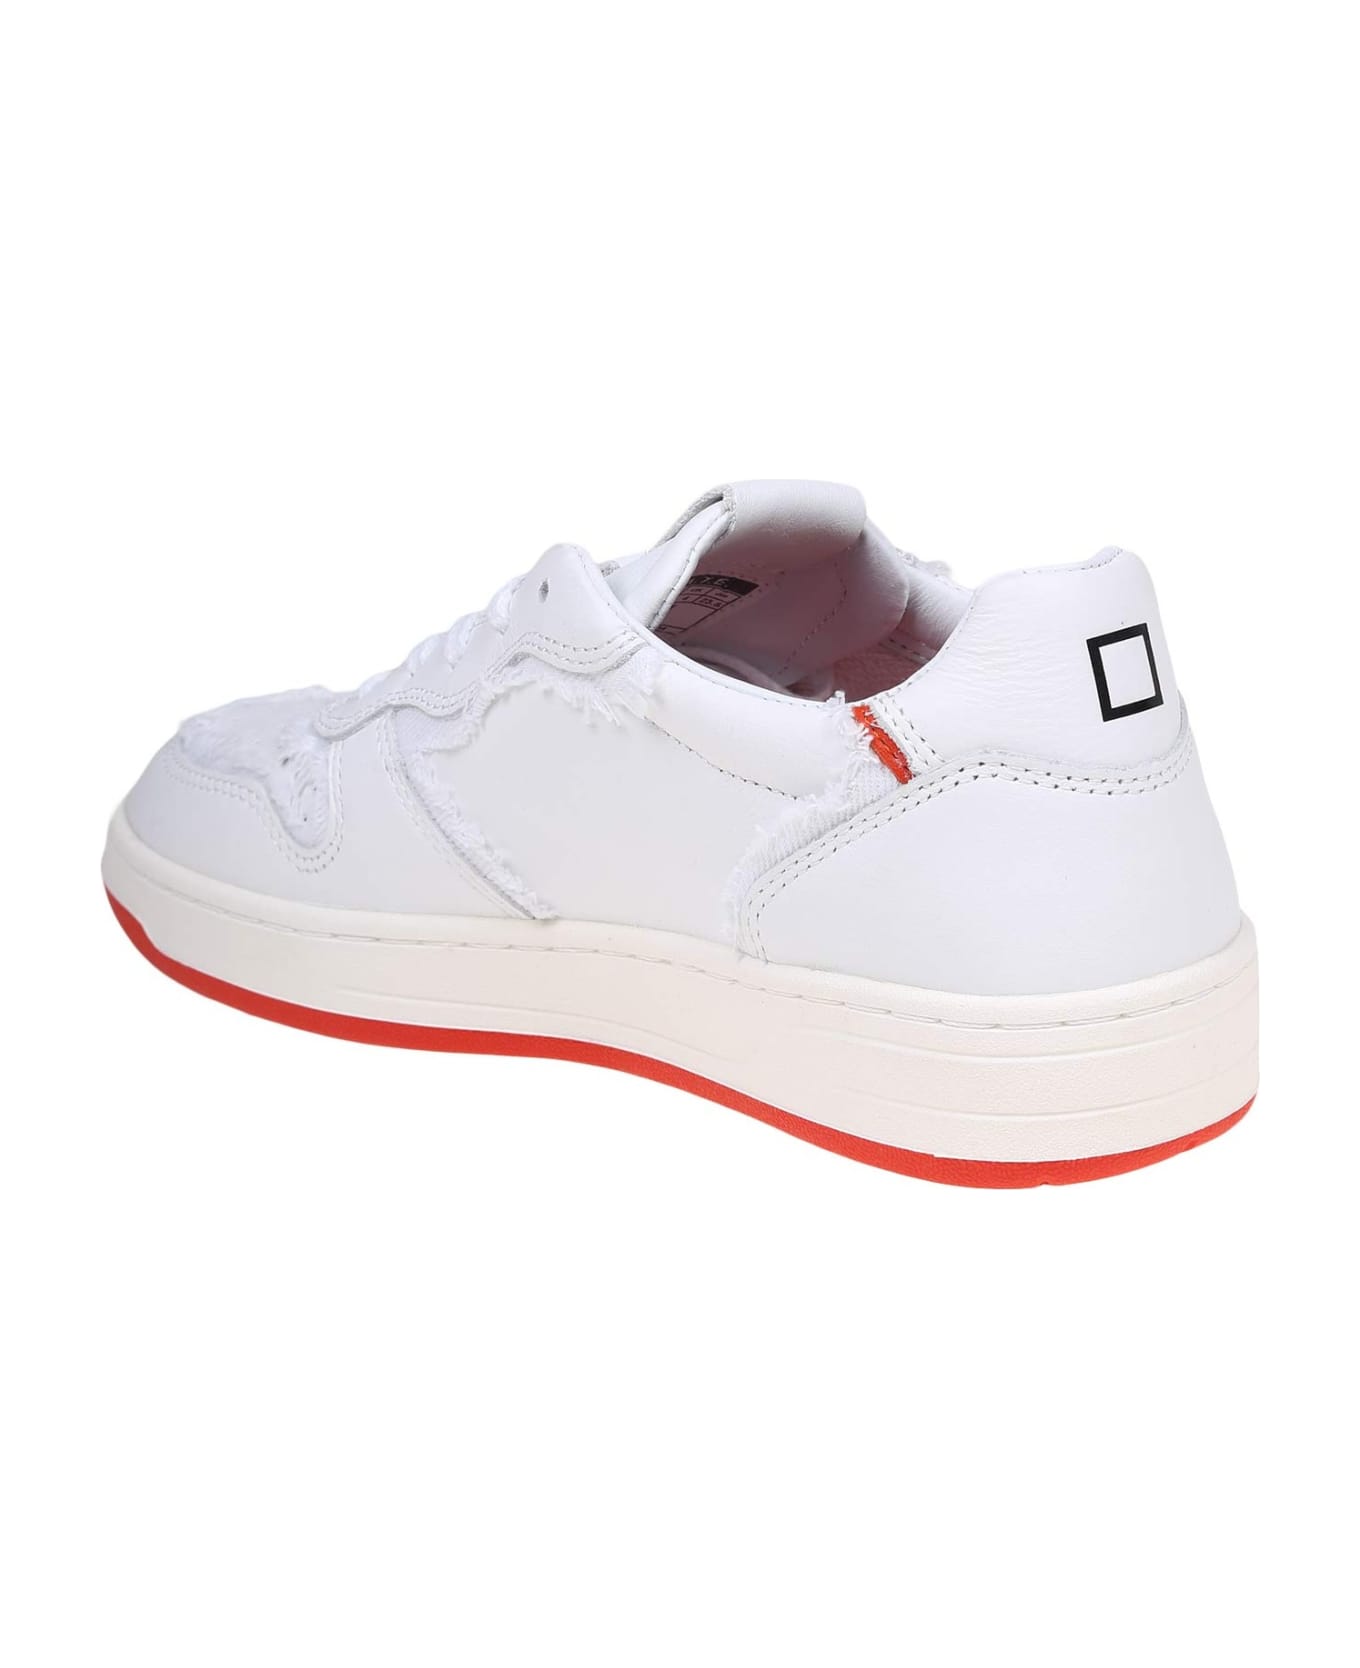 D.A.T.E. Court Sneakers In White Leather - CHERRY スニーカー